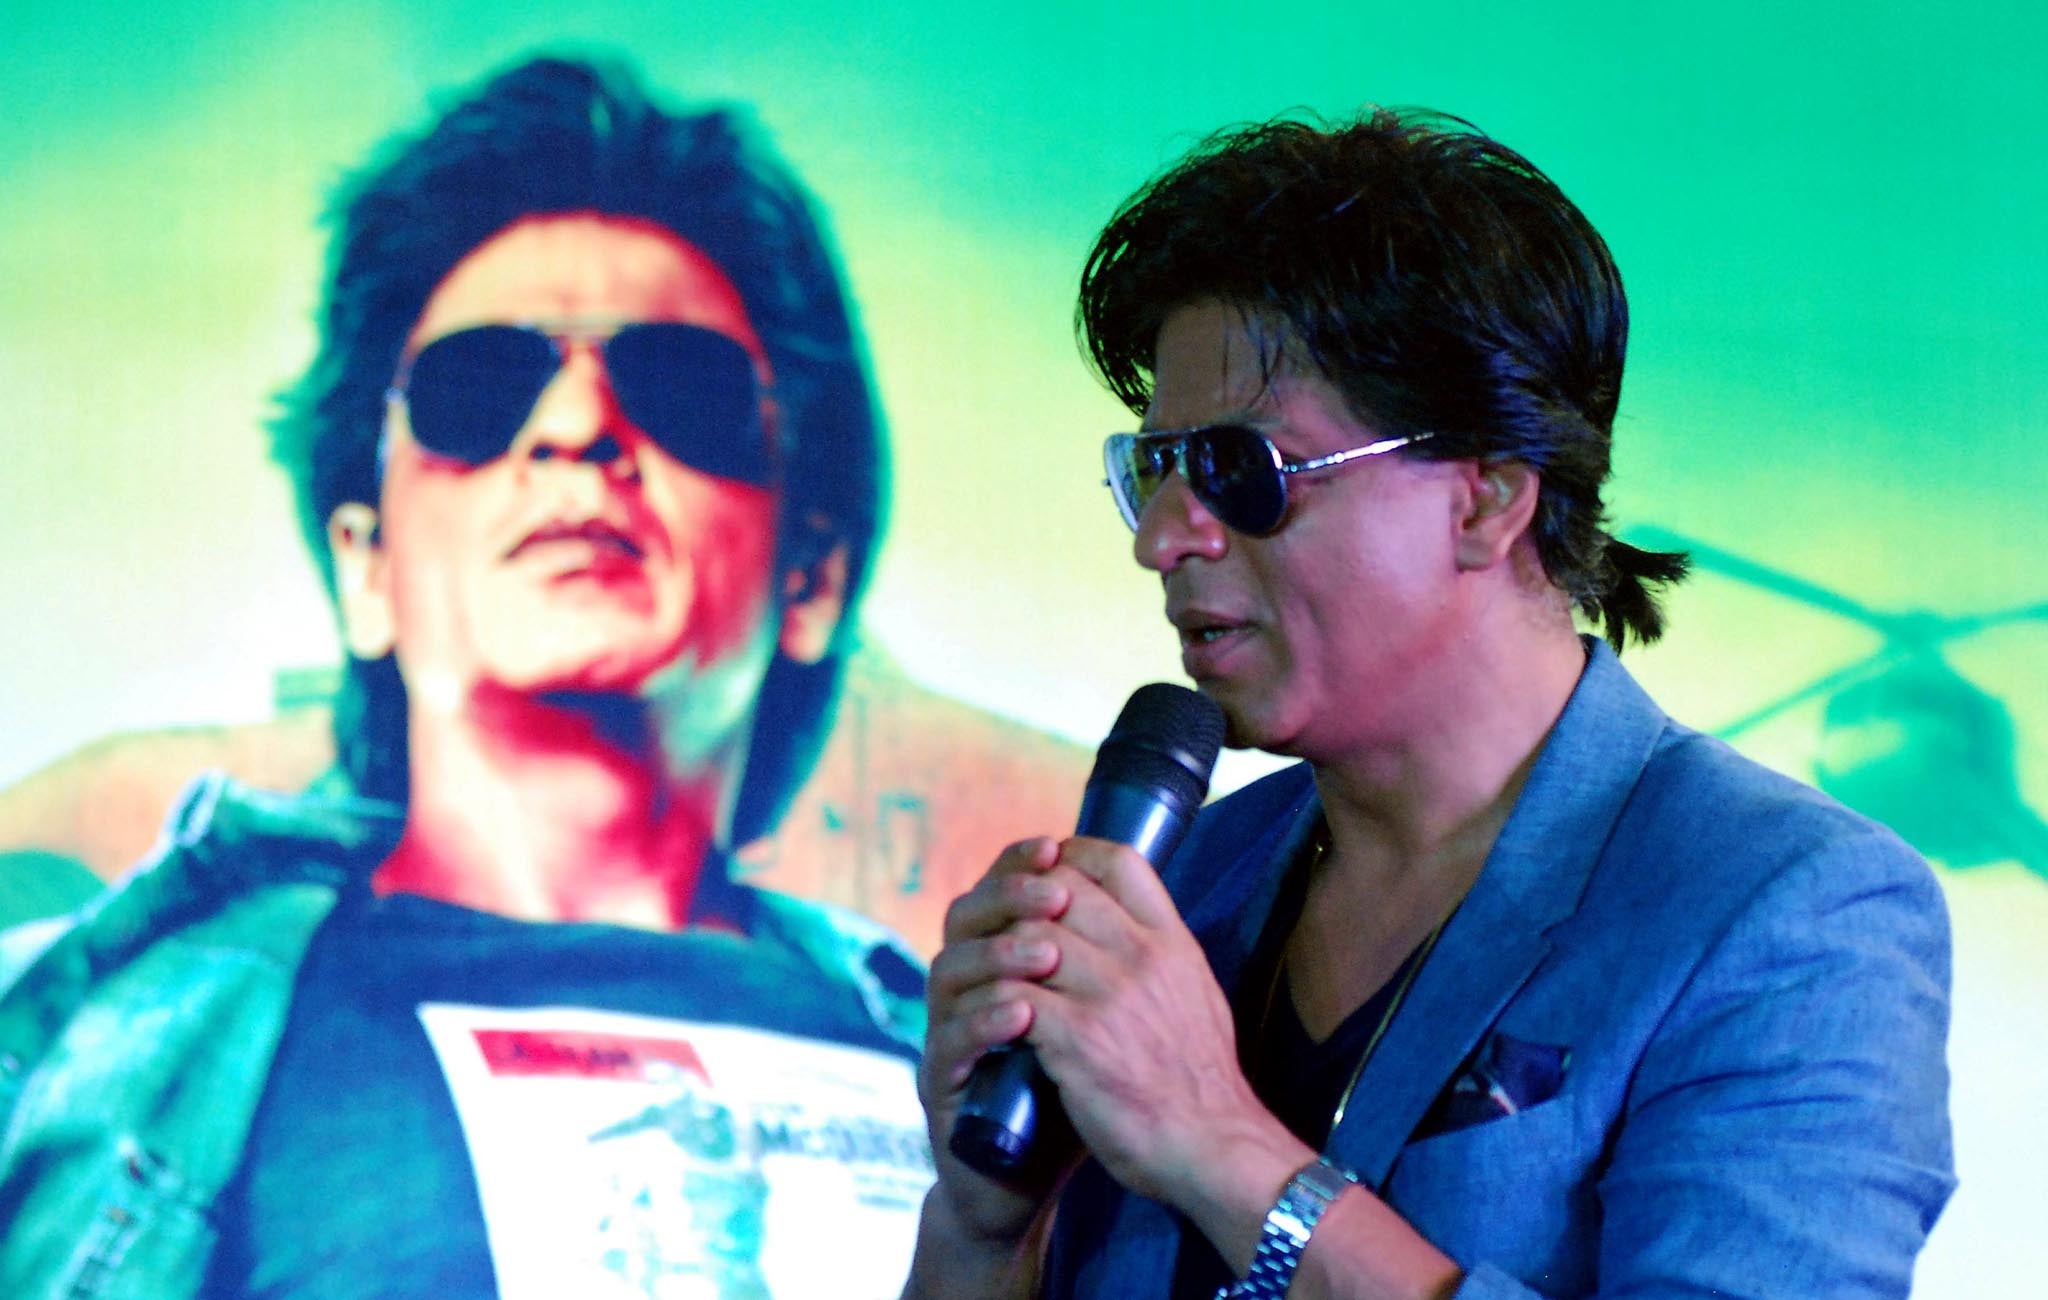 Shah Rukh Khan at a promotional event for his new film Chennai Express